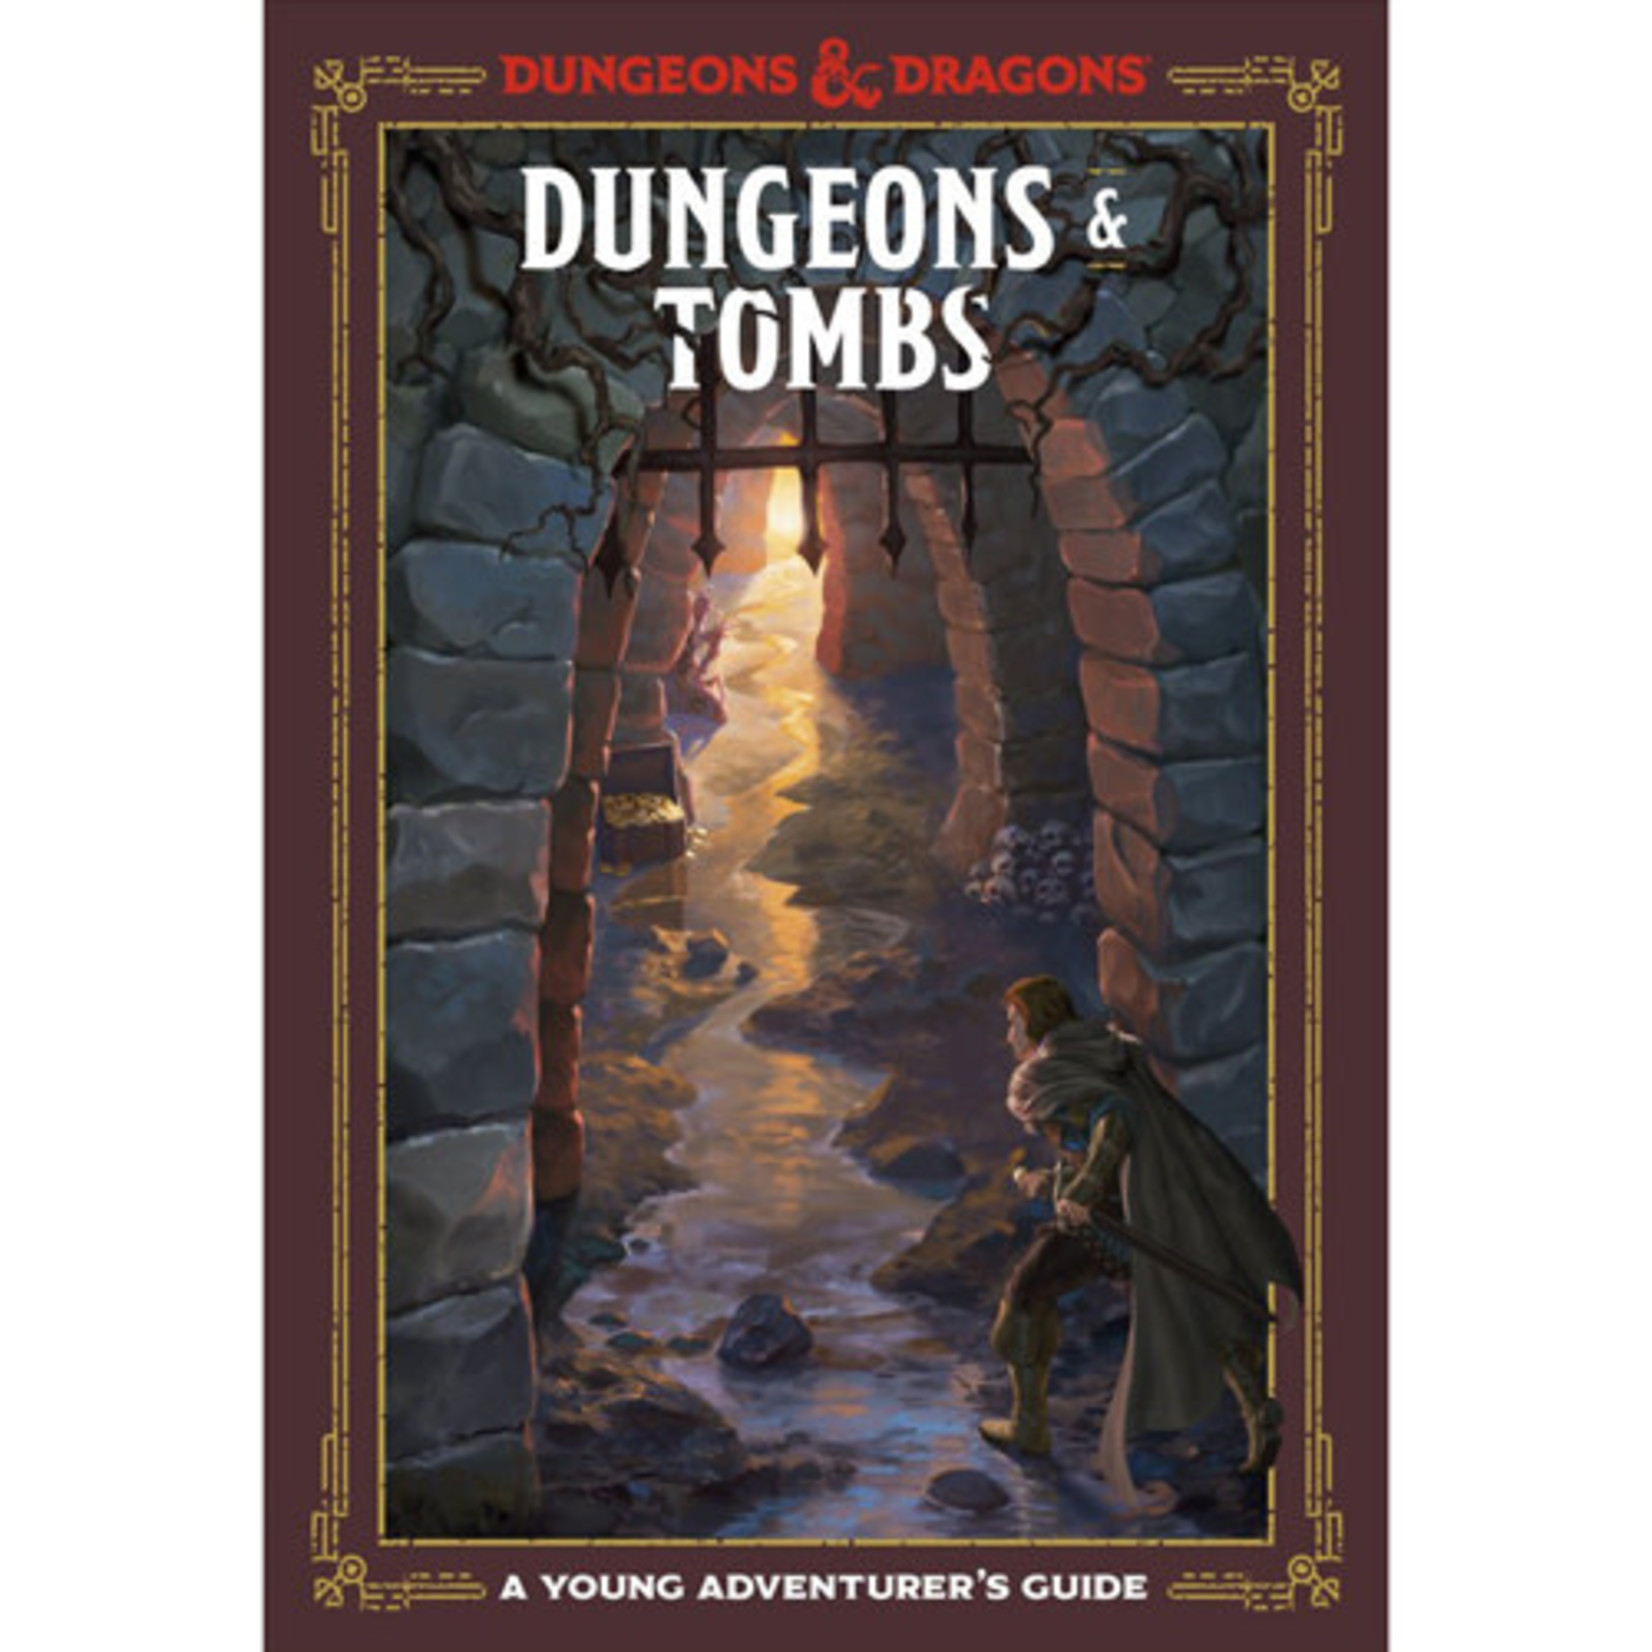 D&D 5E RPG: A Young Adventurer's Guide - Dungeons & Tombs